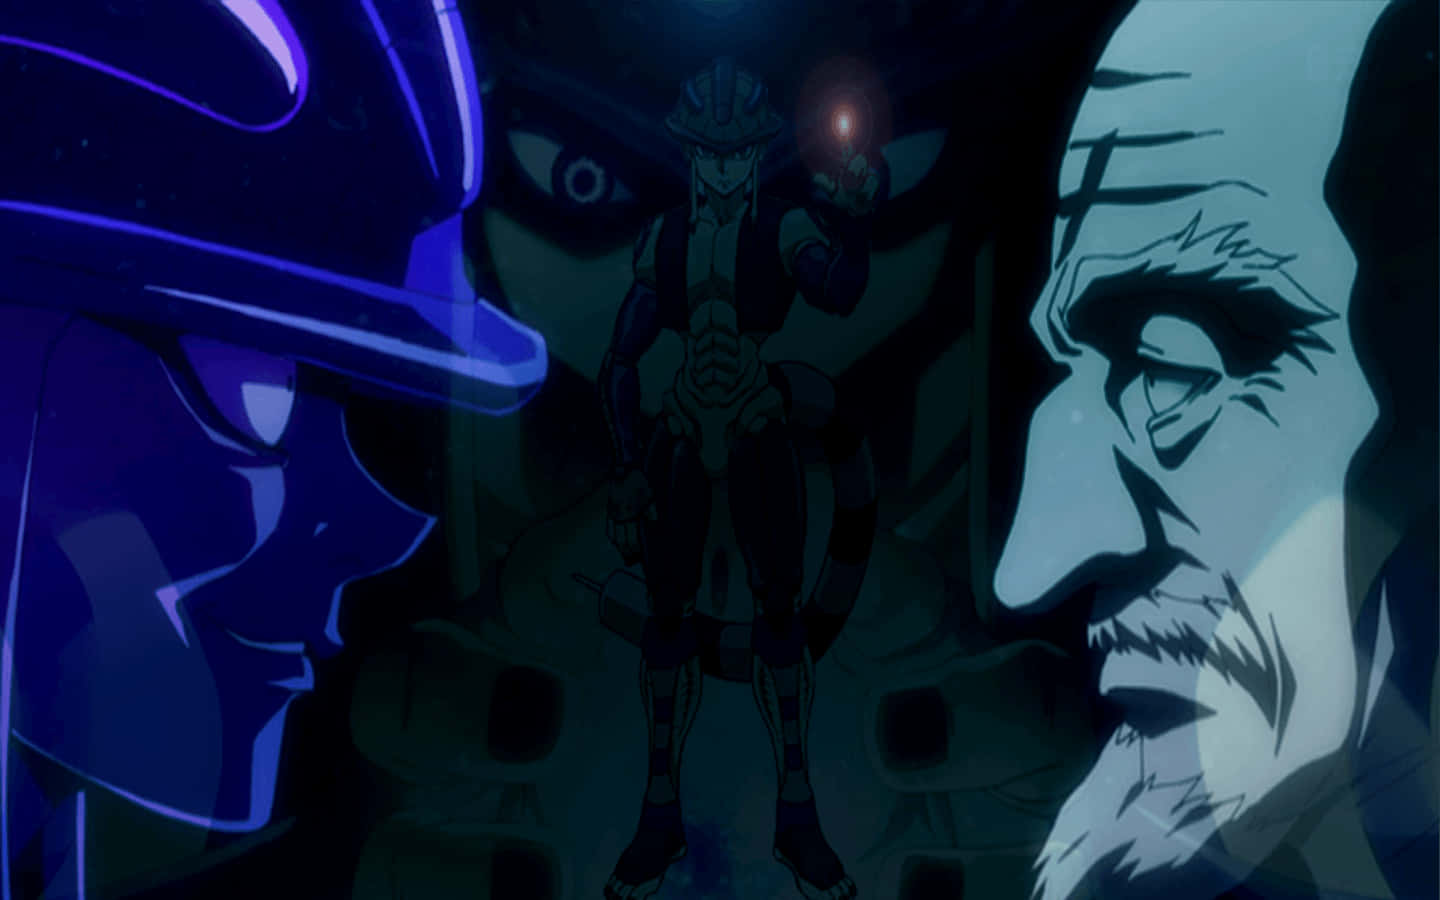 Meruem, The Powerful Chimera Ant King From Hunter X Hunter, Showcasing His Might. Background